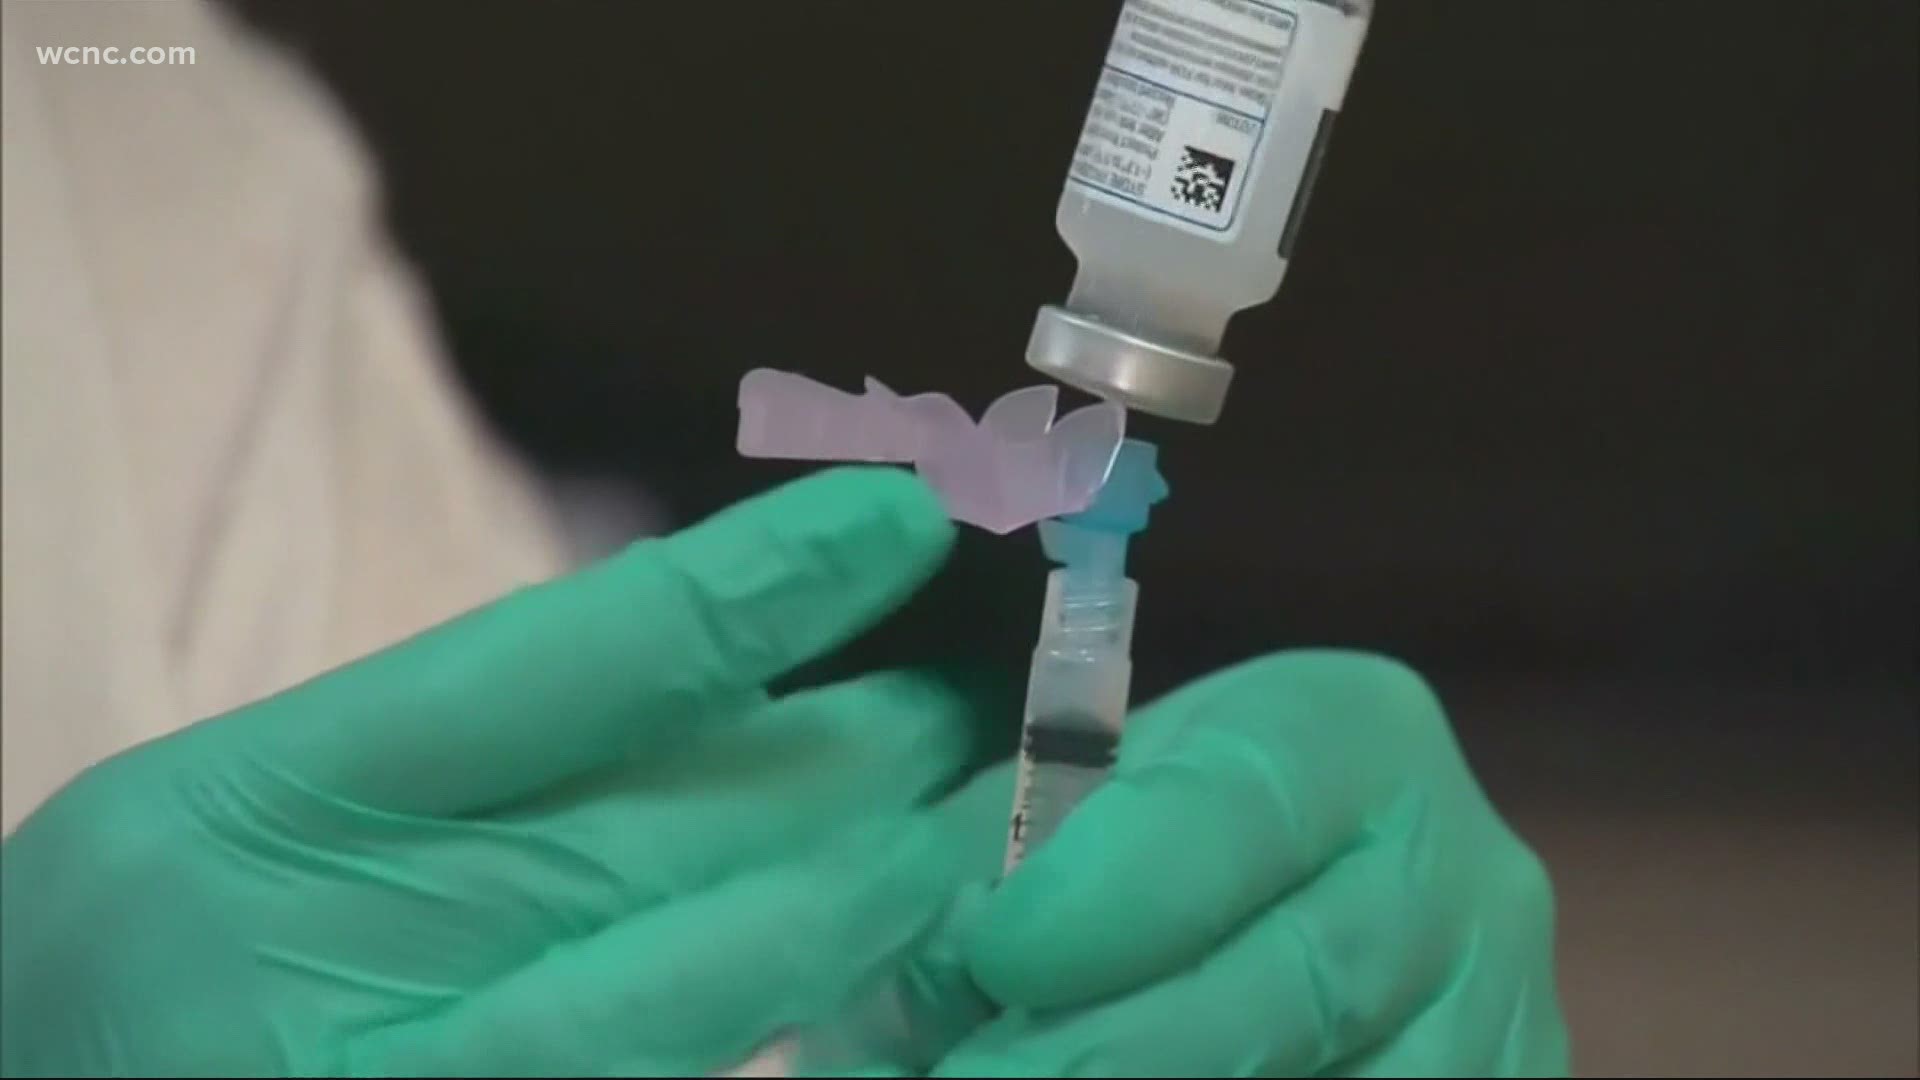 The state is expecting more vaccine doses next week.